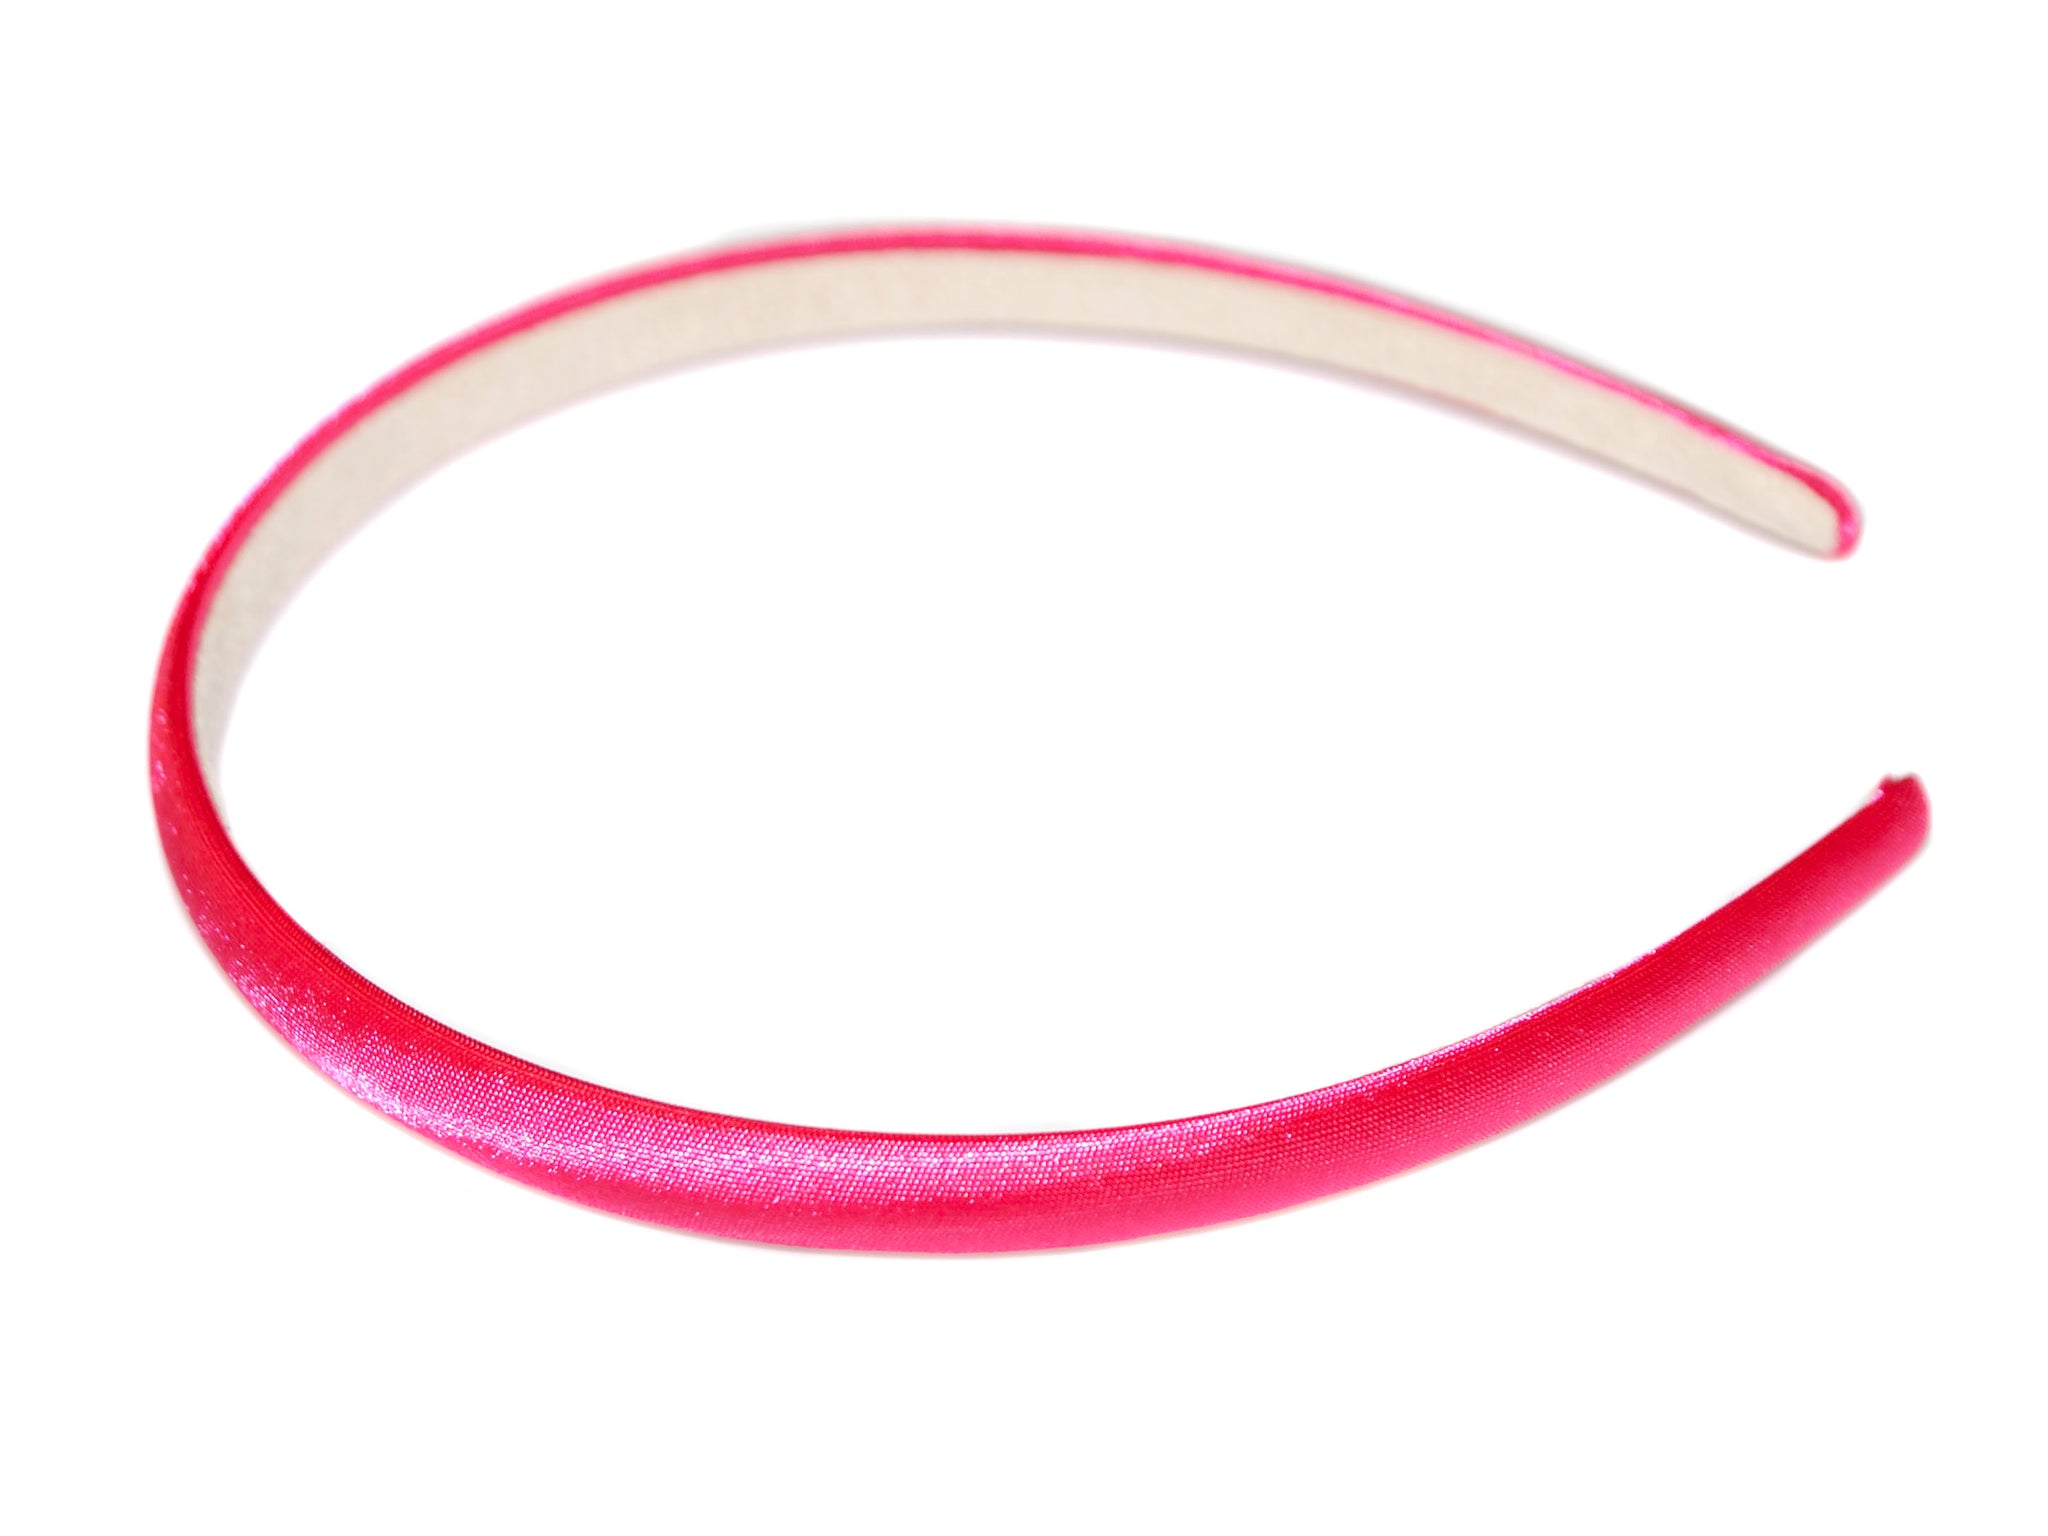 Satin 1cm Suede Lined Alice Band - Fuchsia